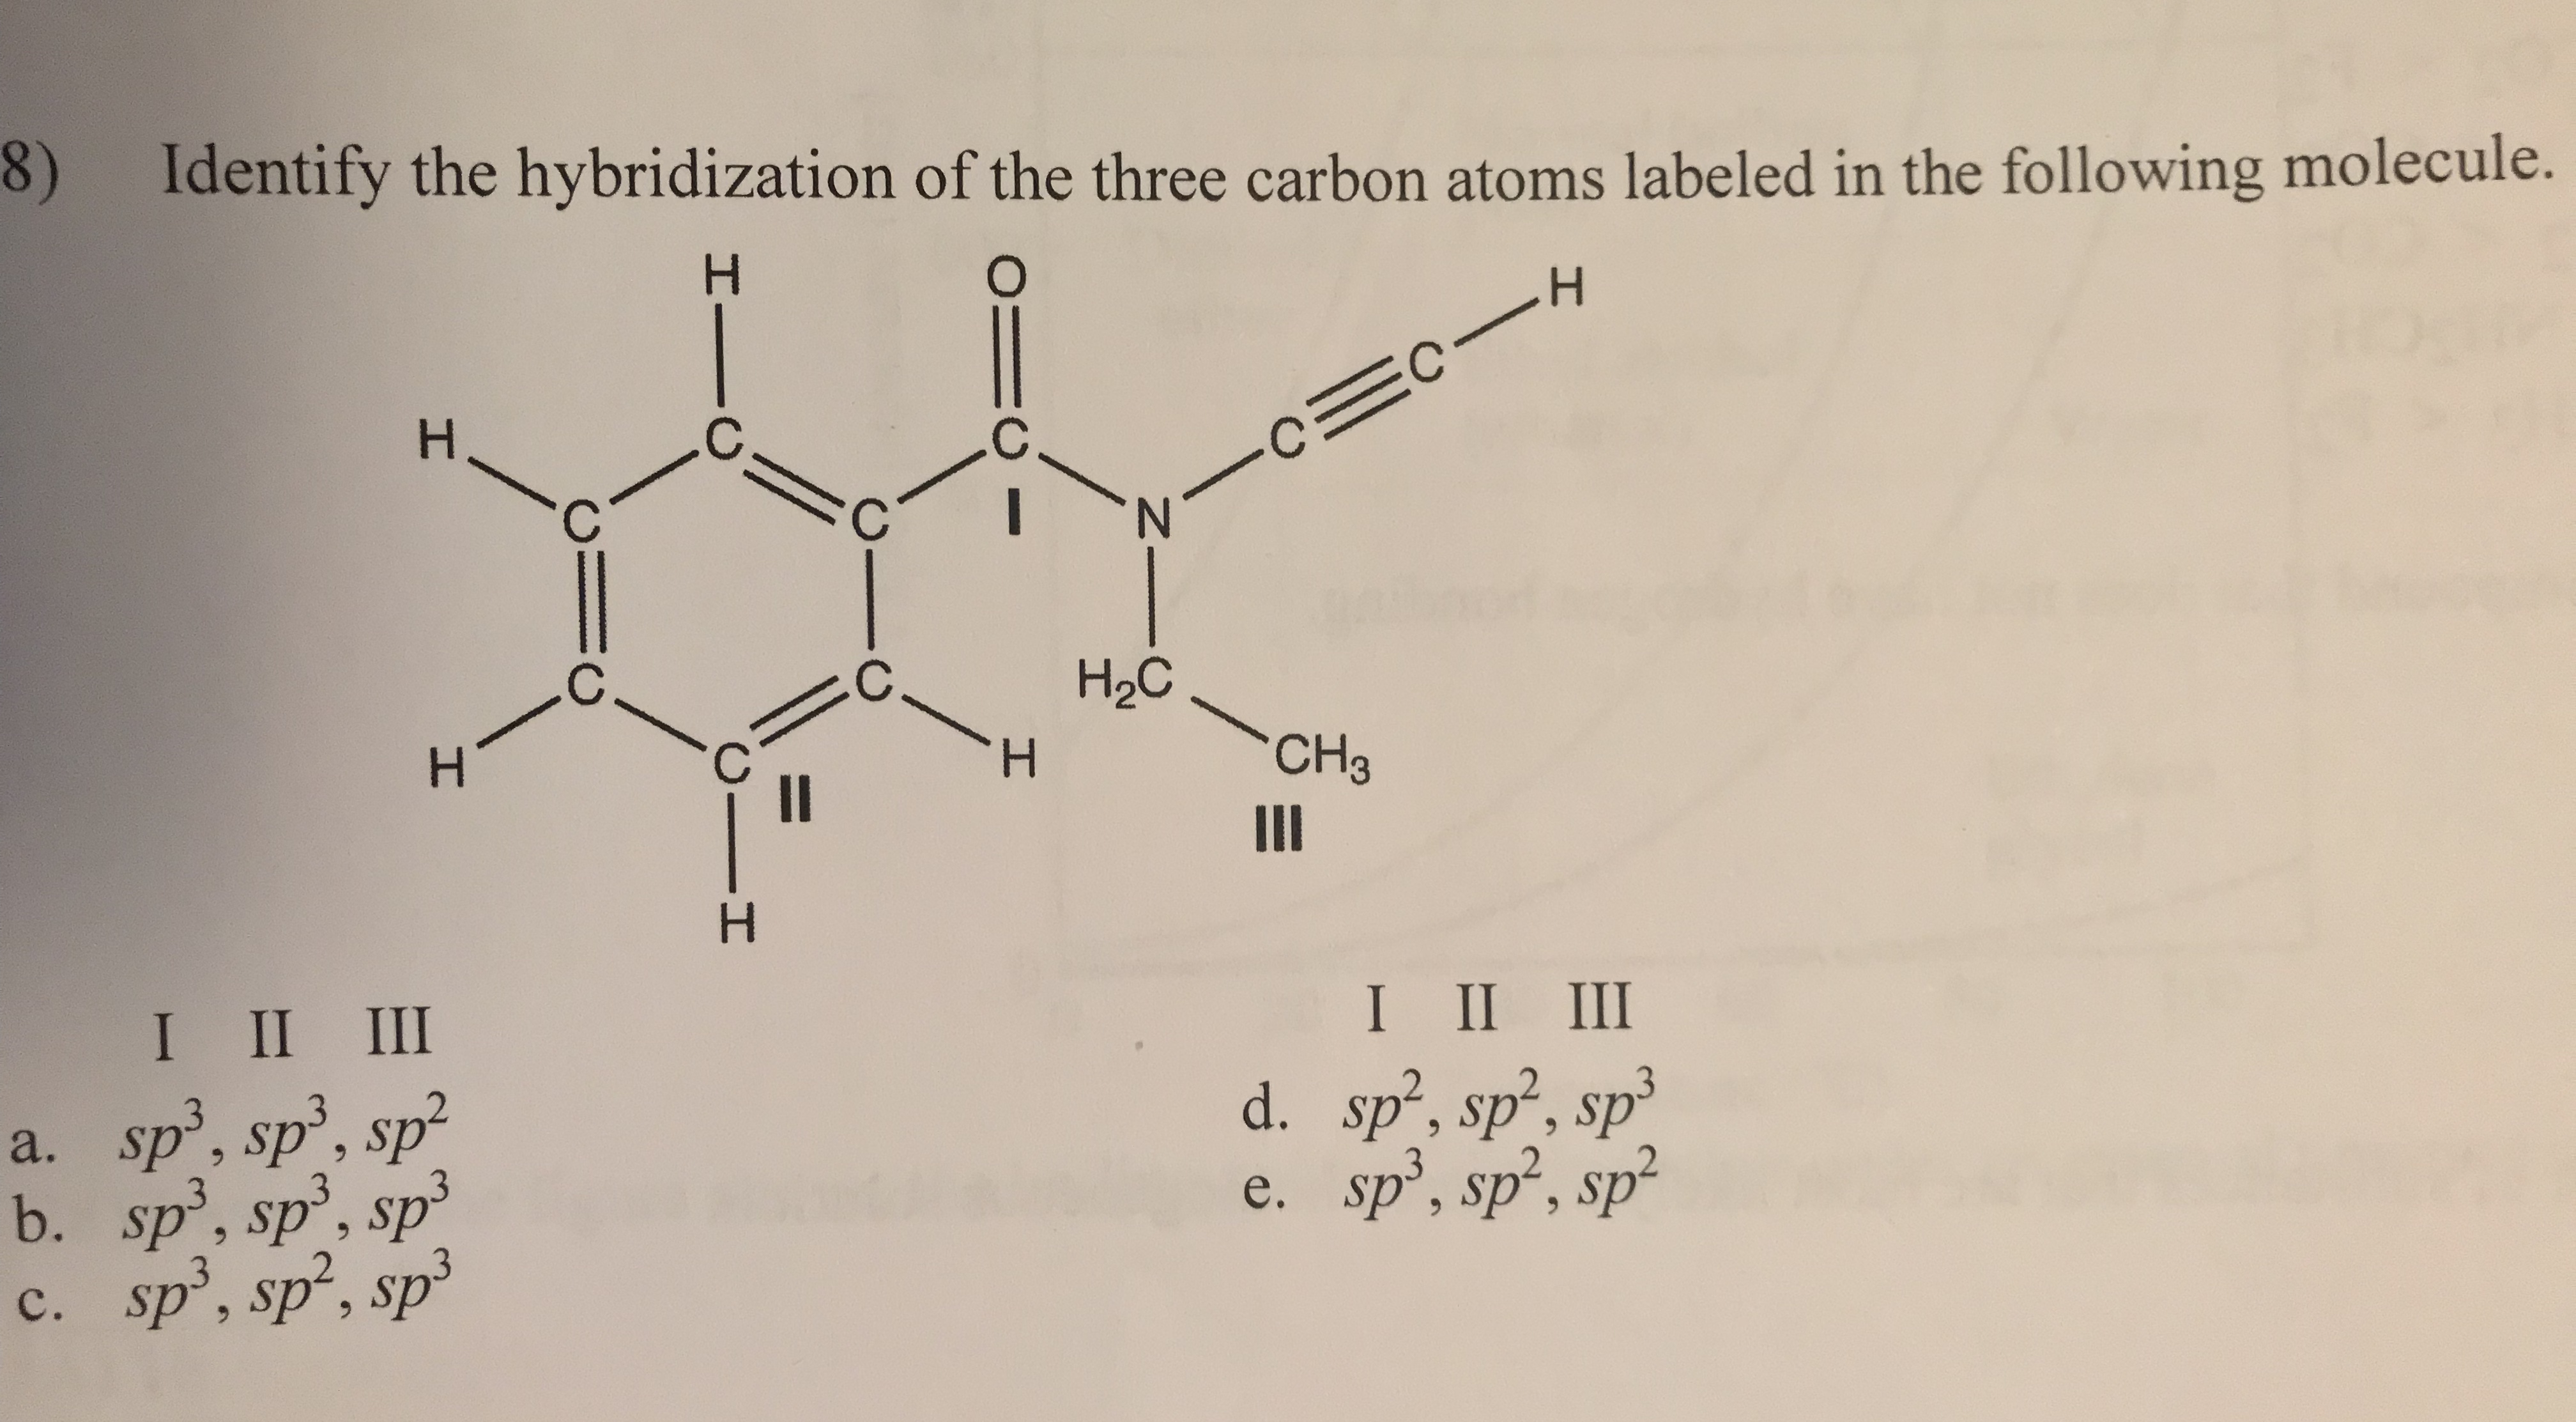 identify two differences between carbon 12 and carbon 14